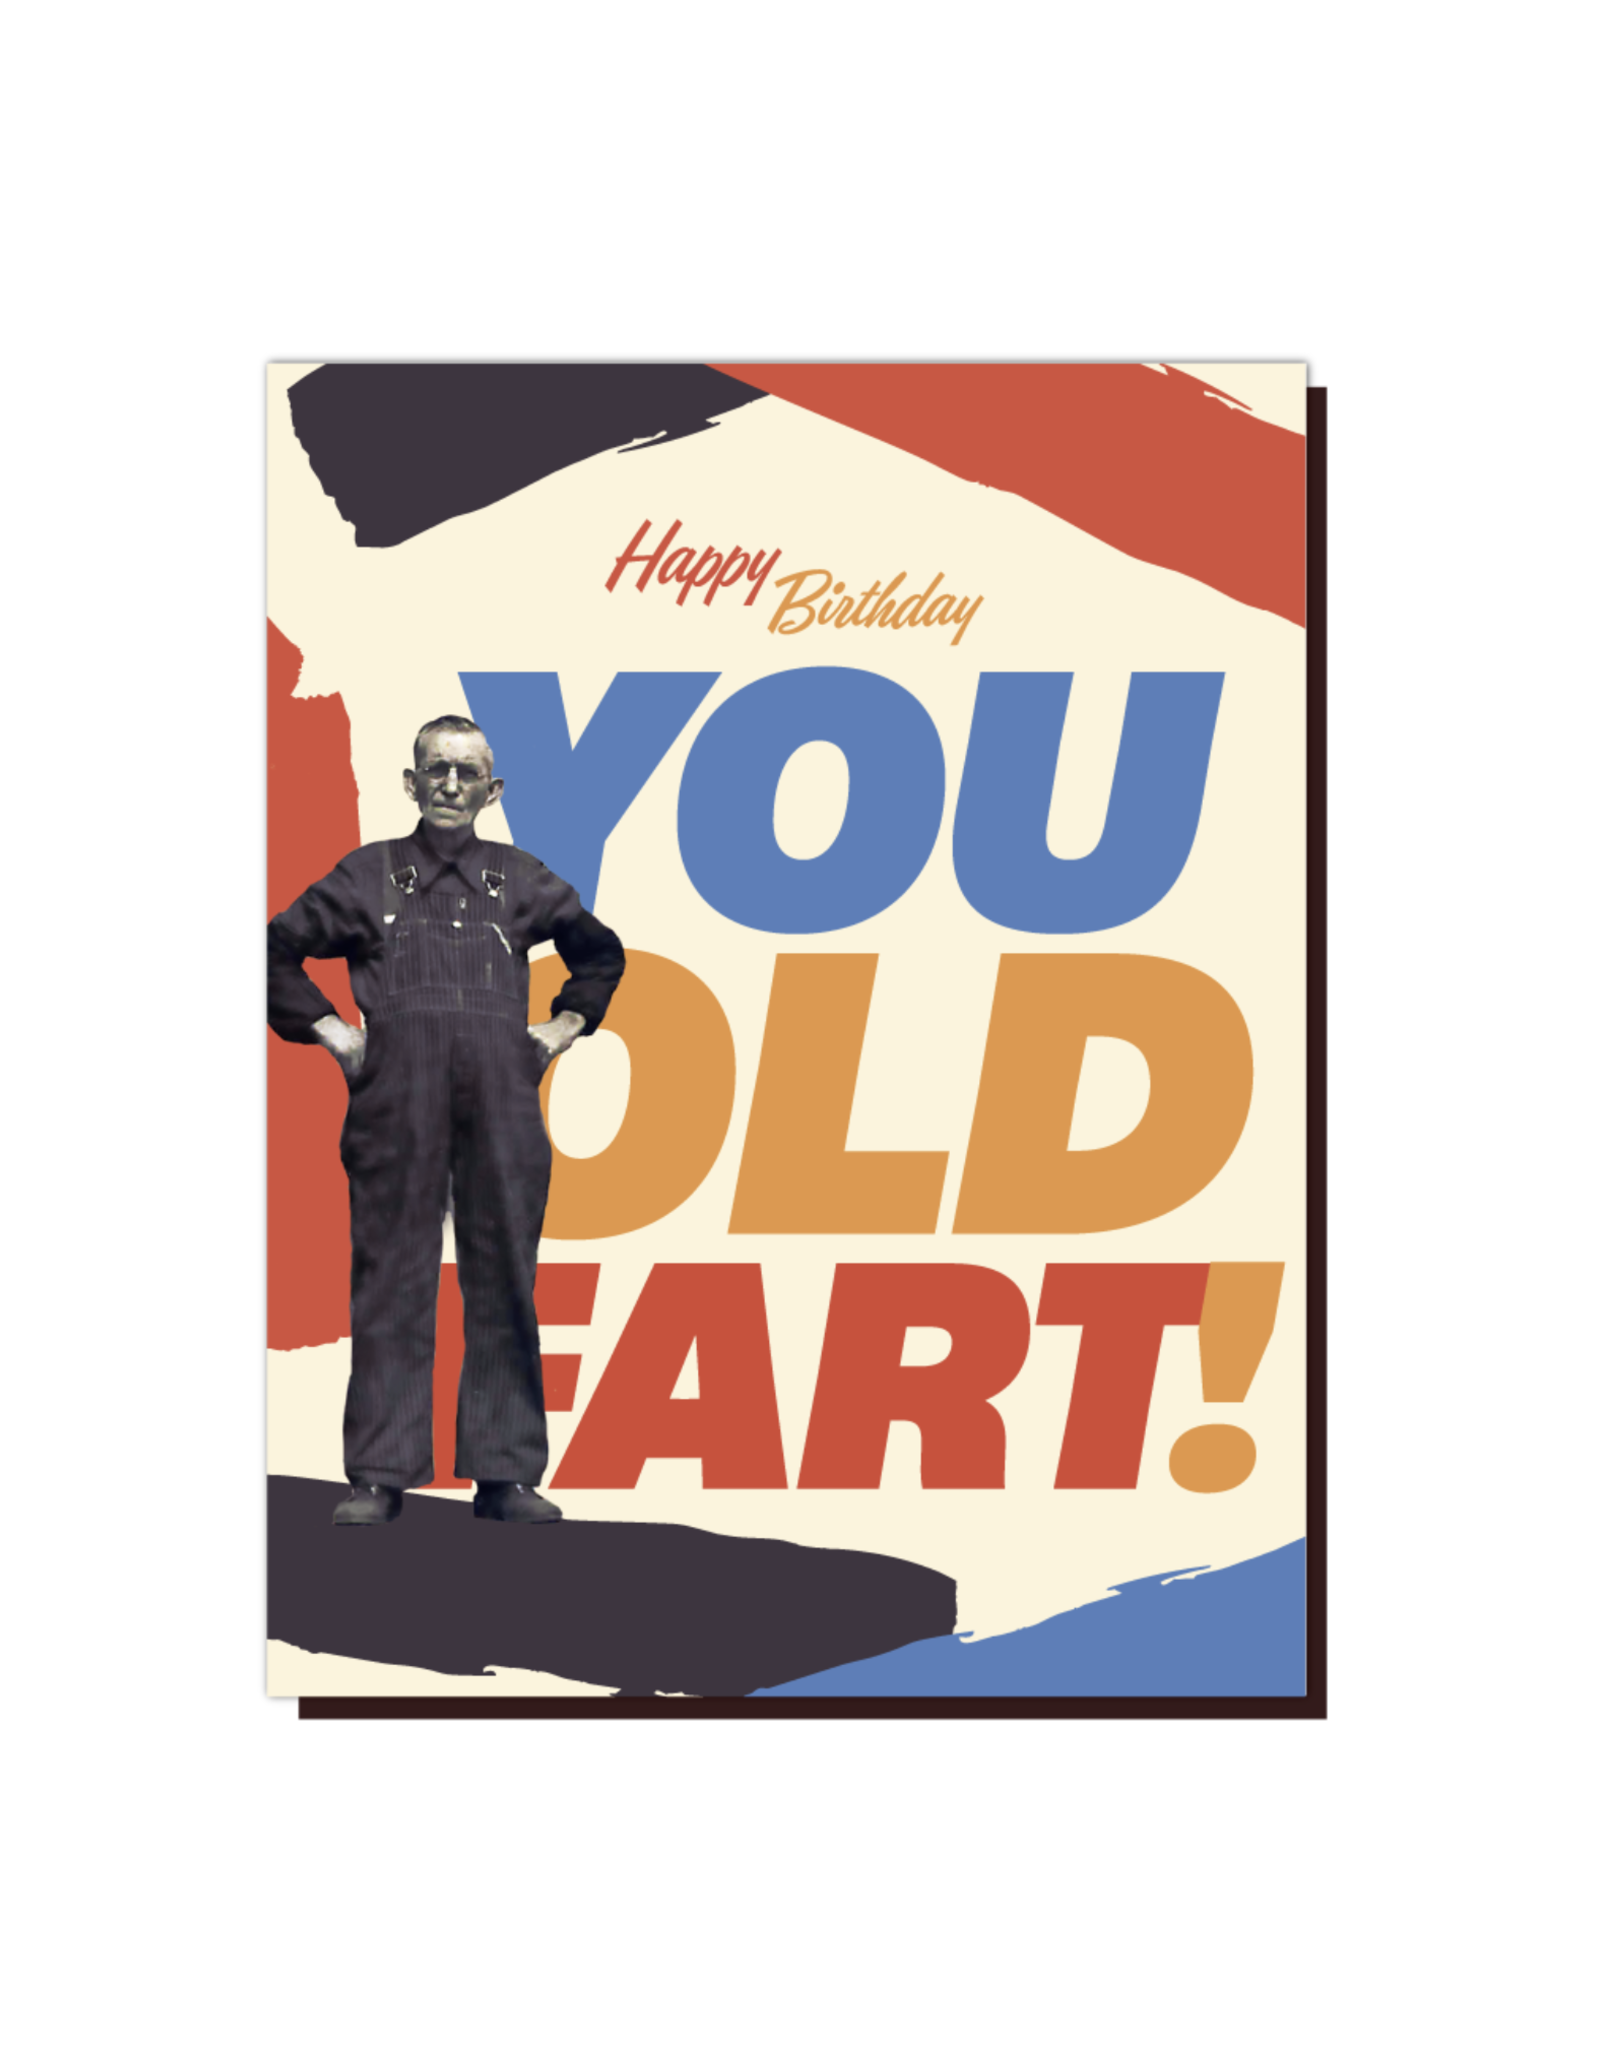 Happy Birthday You Old Fart Greeting Card Home